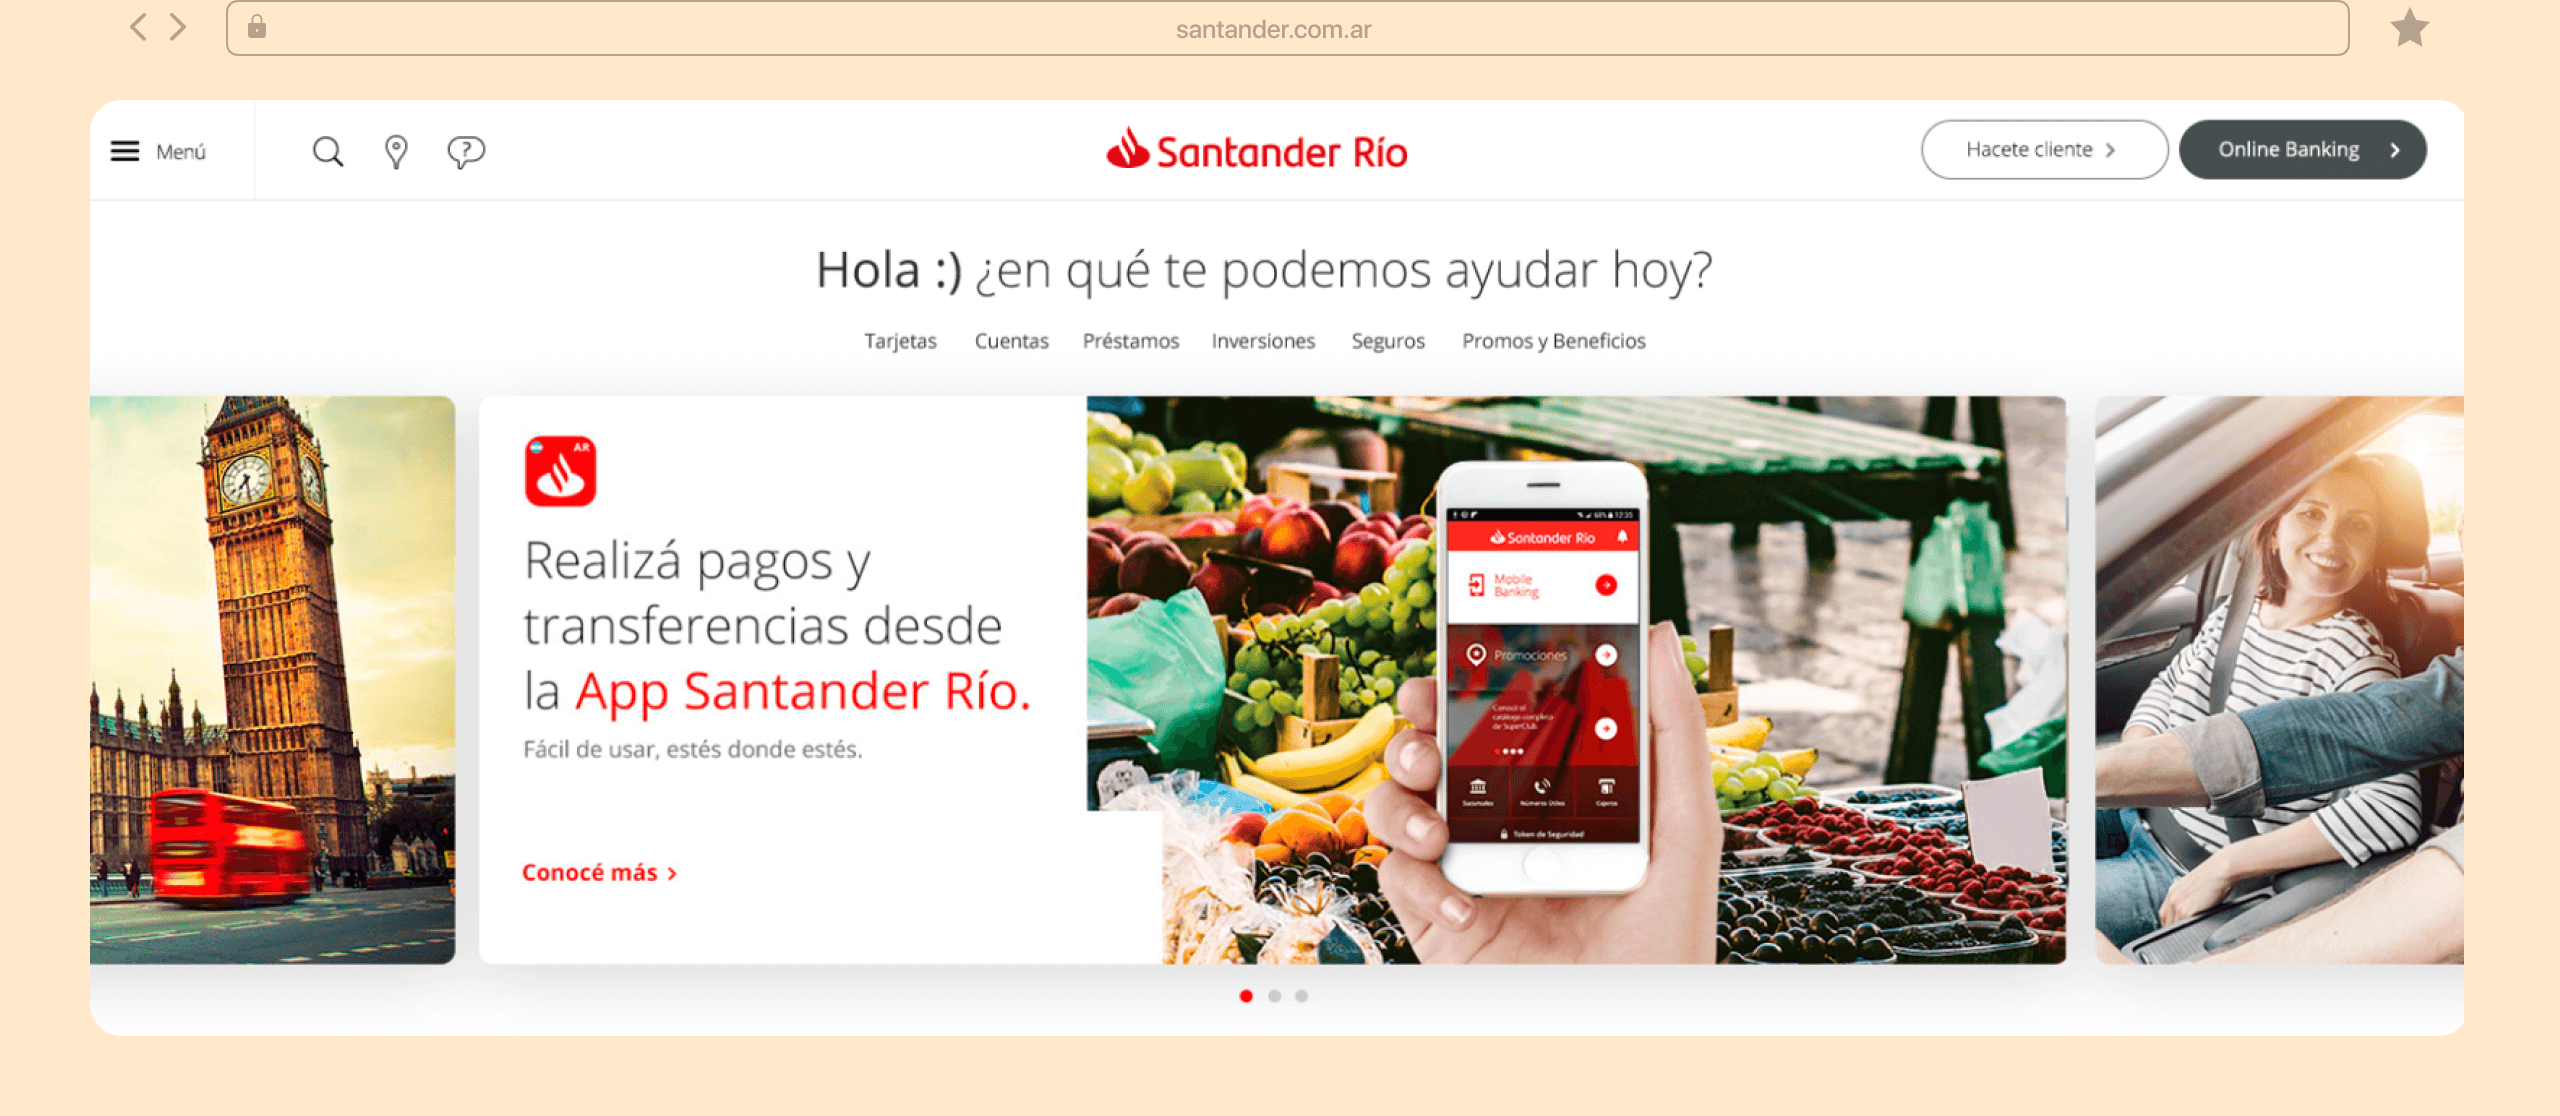 Image of a web browser showing the design of the Main Page of the Banco Santander website